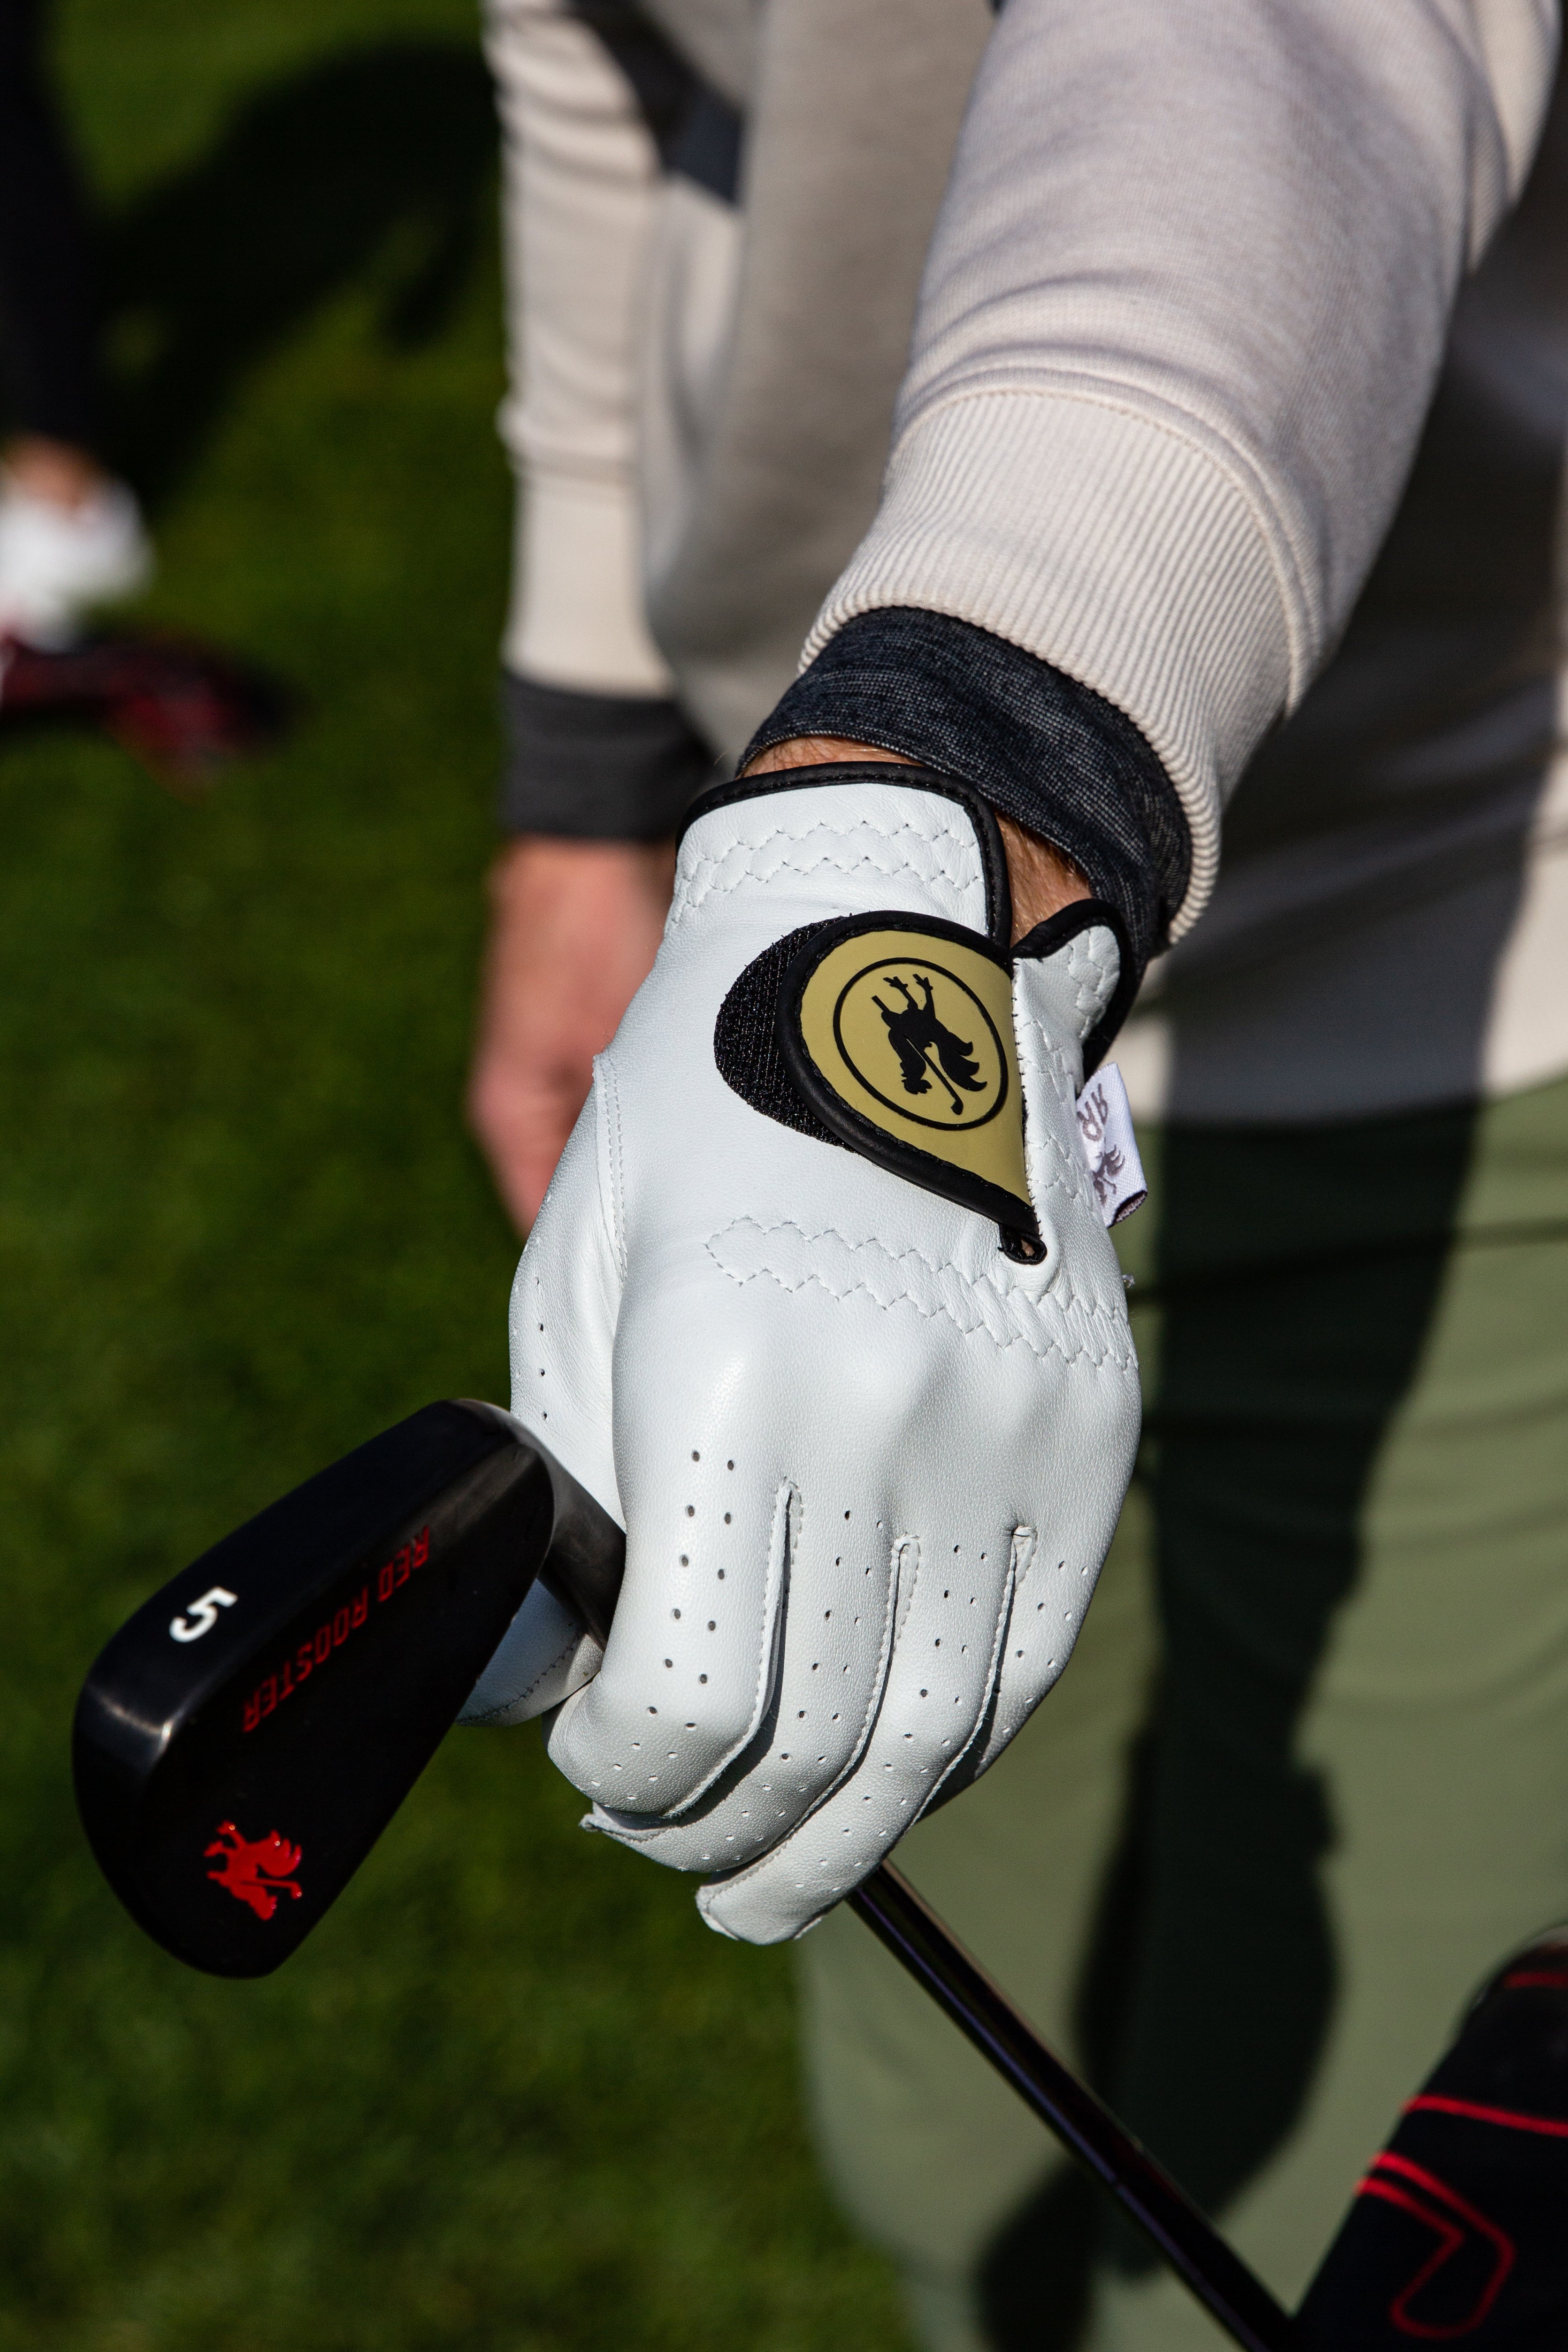 man wearing The Boilermaker golf glove in left hand